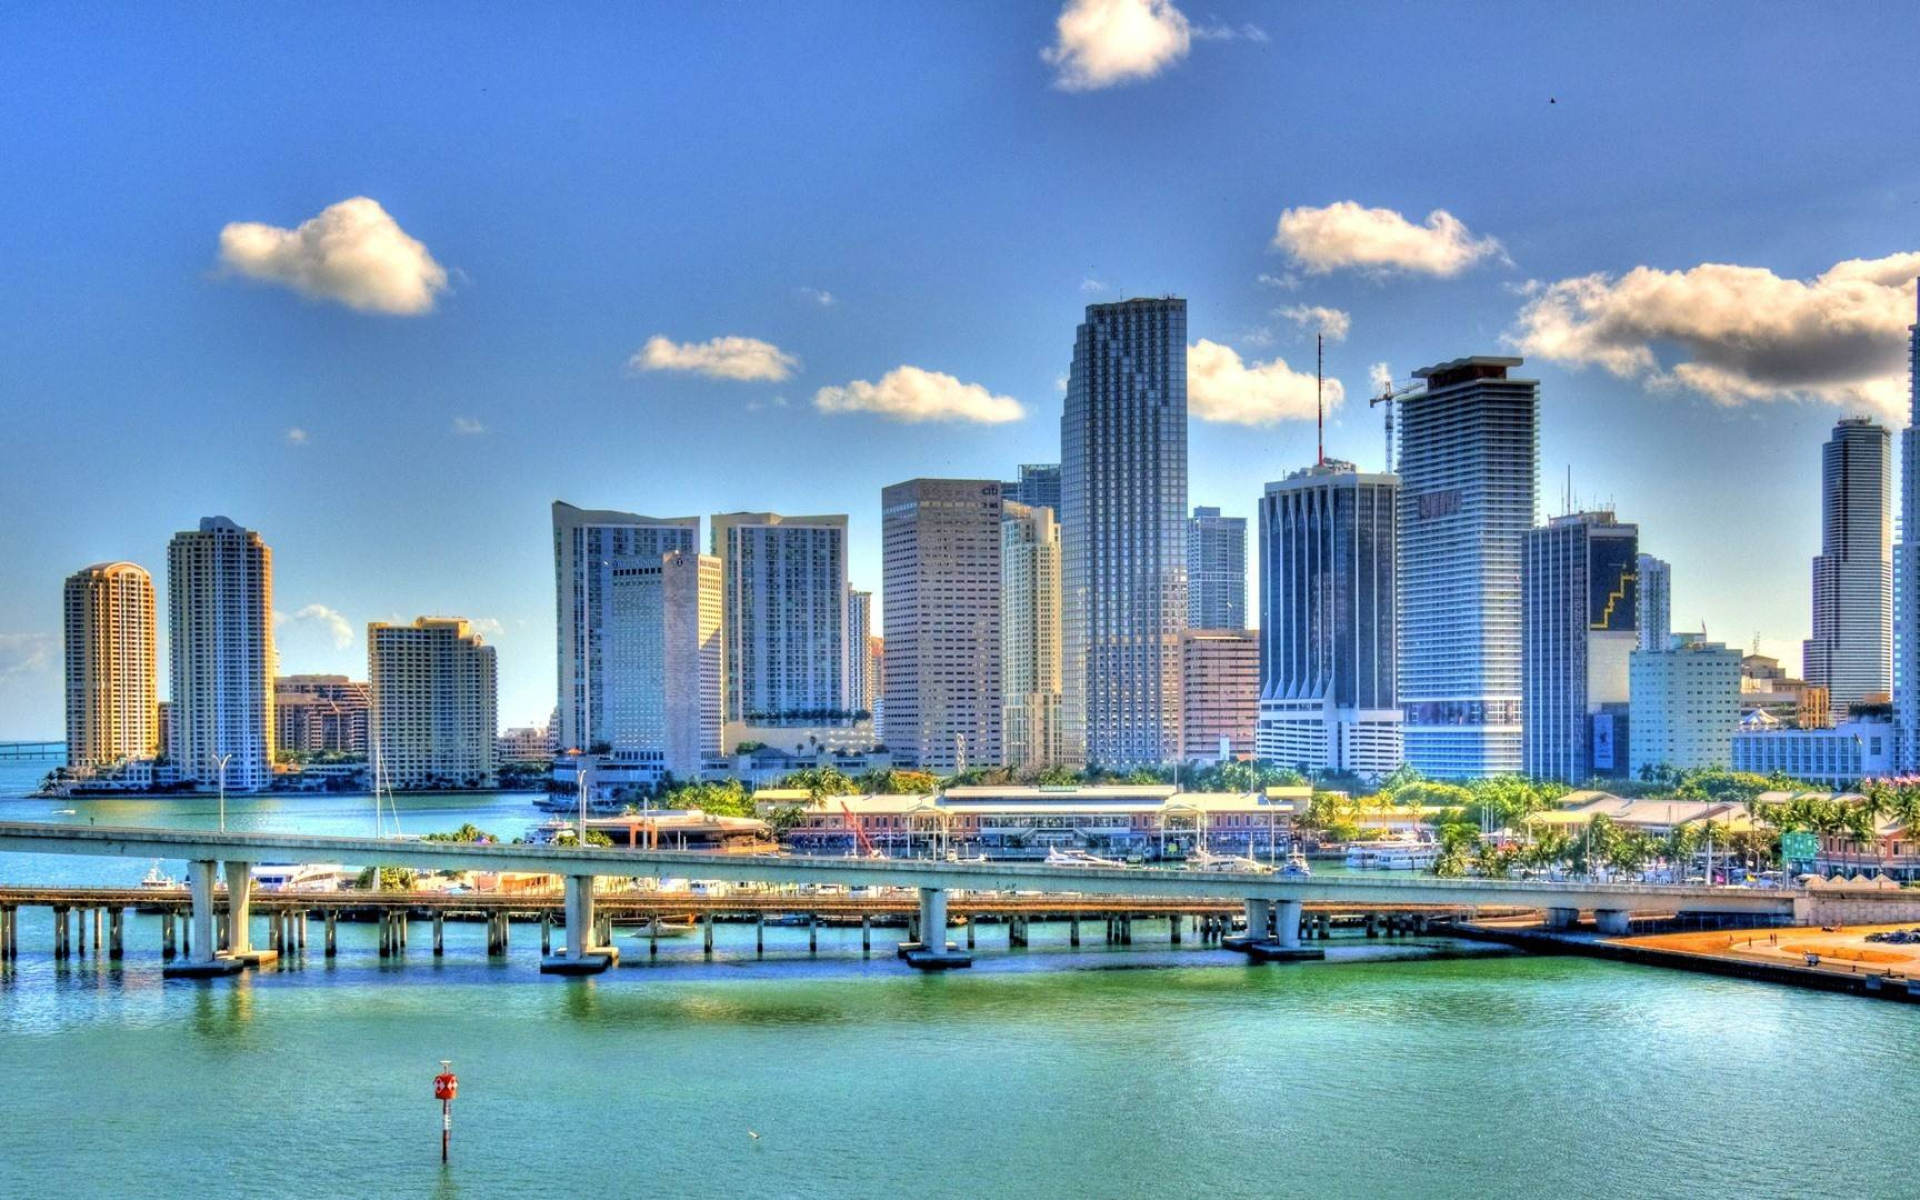 Download wallpaper Miami, HDR, summer, cityscapes, american cities, Florida, America, USA for desktop with resolution 1920x1200. High Quality HD picture wallpaper